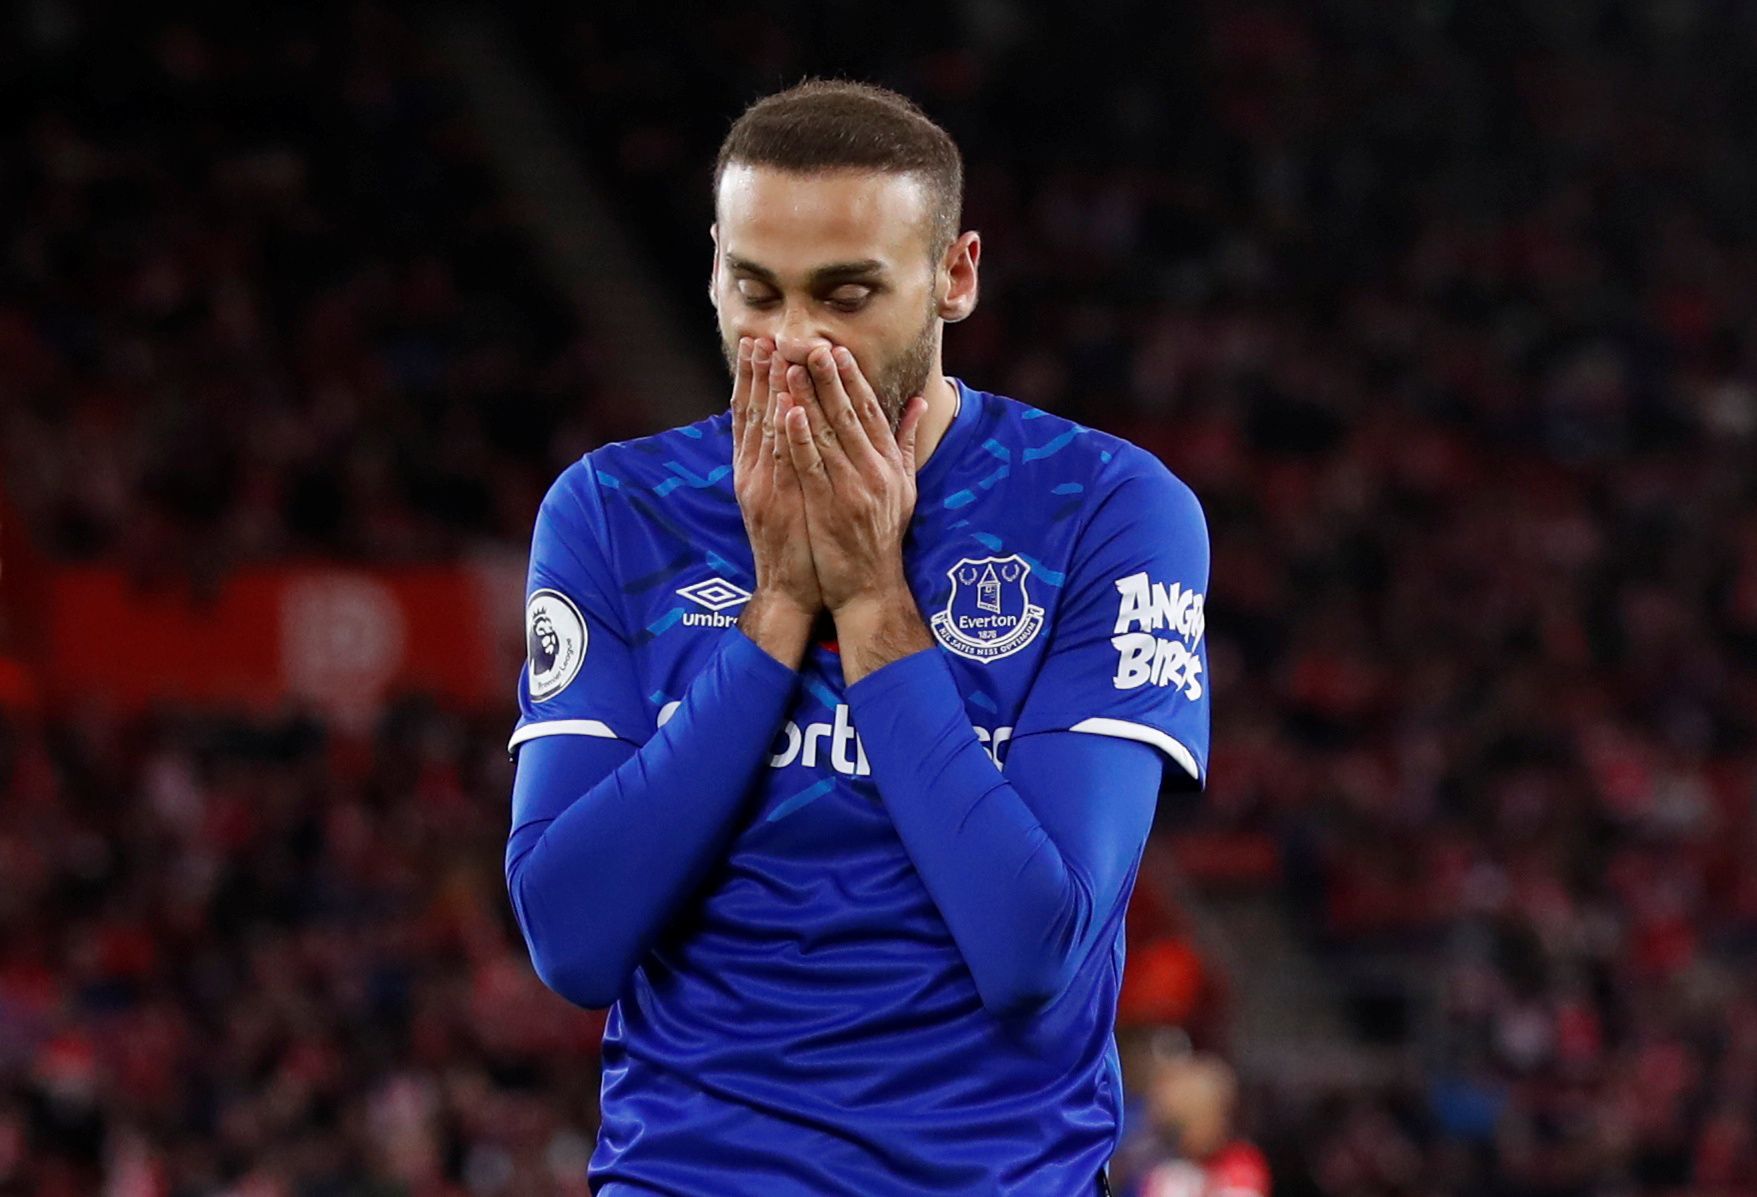 Soccer Football - Premier League - Southampton v Everton - St Mary's Stadium, Southampton, Britain - November 9, 2019  Everton's Cenk Tosun reacts           REUTERS/David Klein  EDITORIAL USE ONLY. No use with unauthorized audio, video, data, fixture lists, club/league logos or 